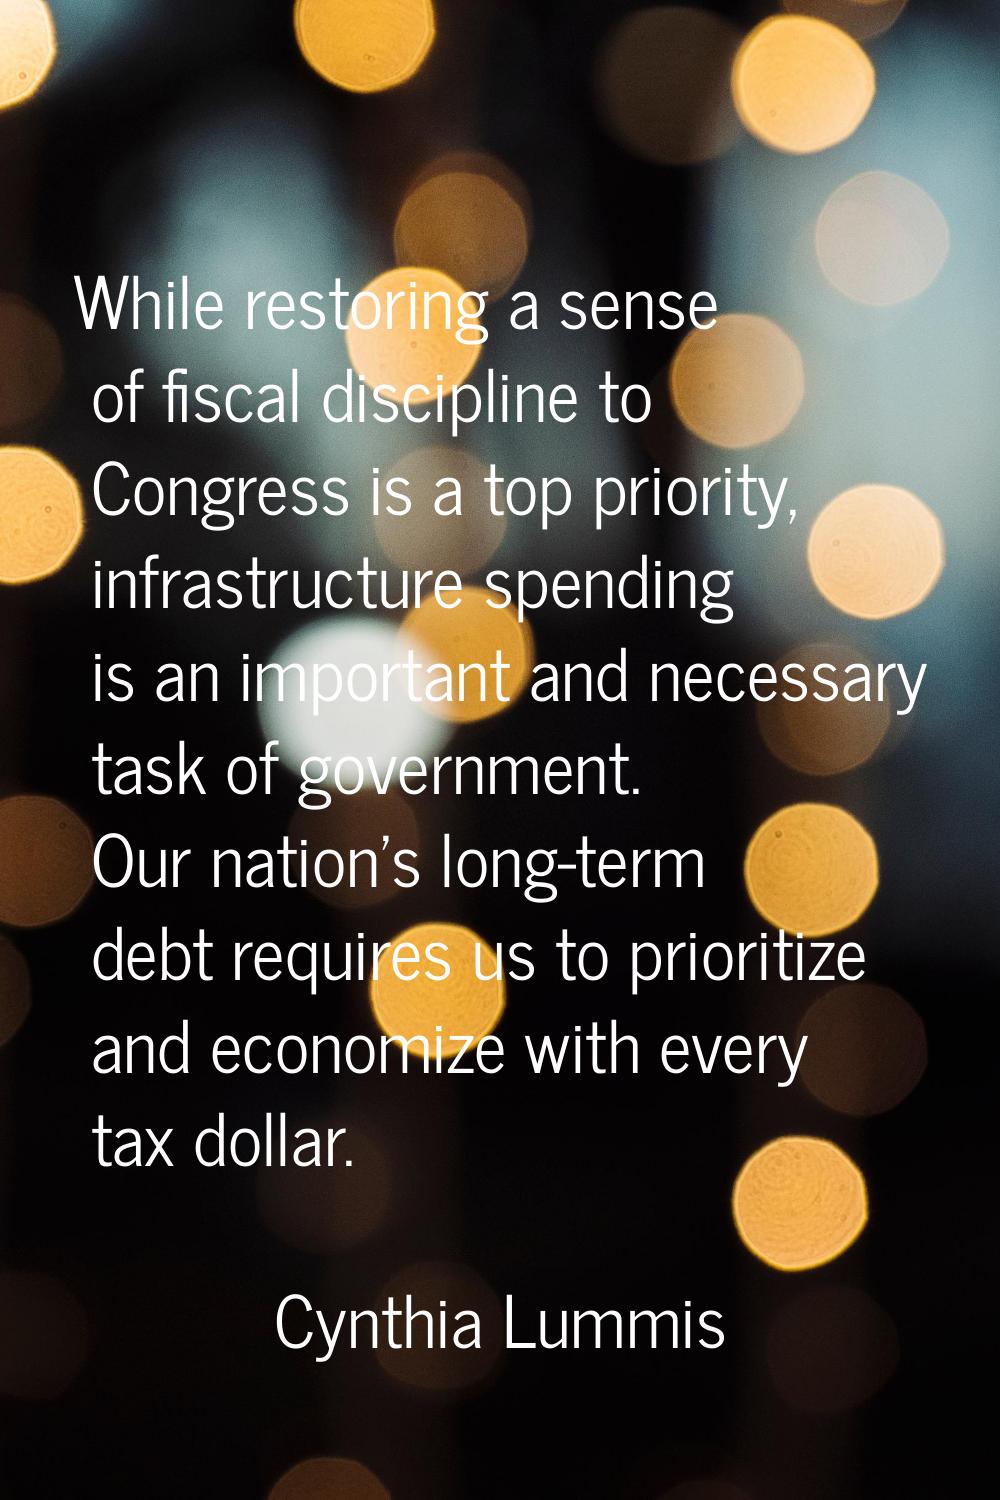 While restoring a sense of fiscal discipline to Congress is a top priority, infrastructure spending